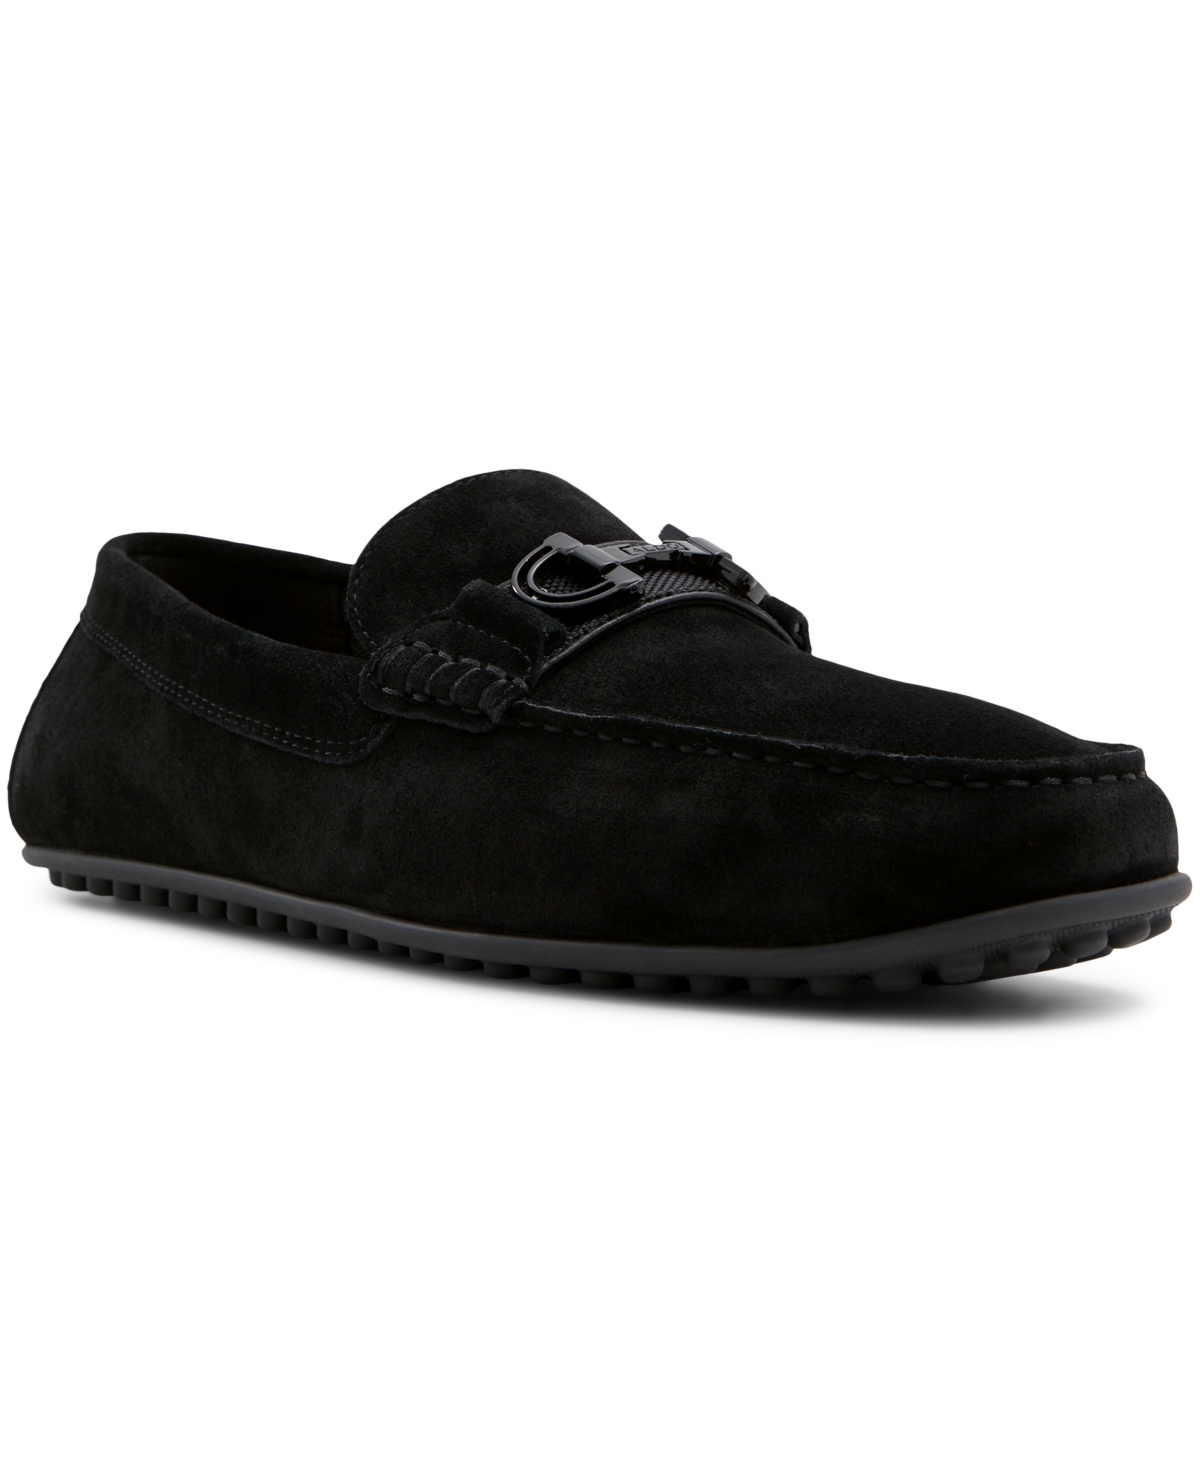 Men's Scuderia Casual Leather Bit Loafers - Navy